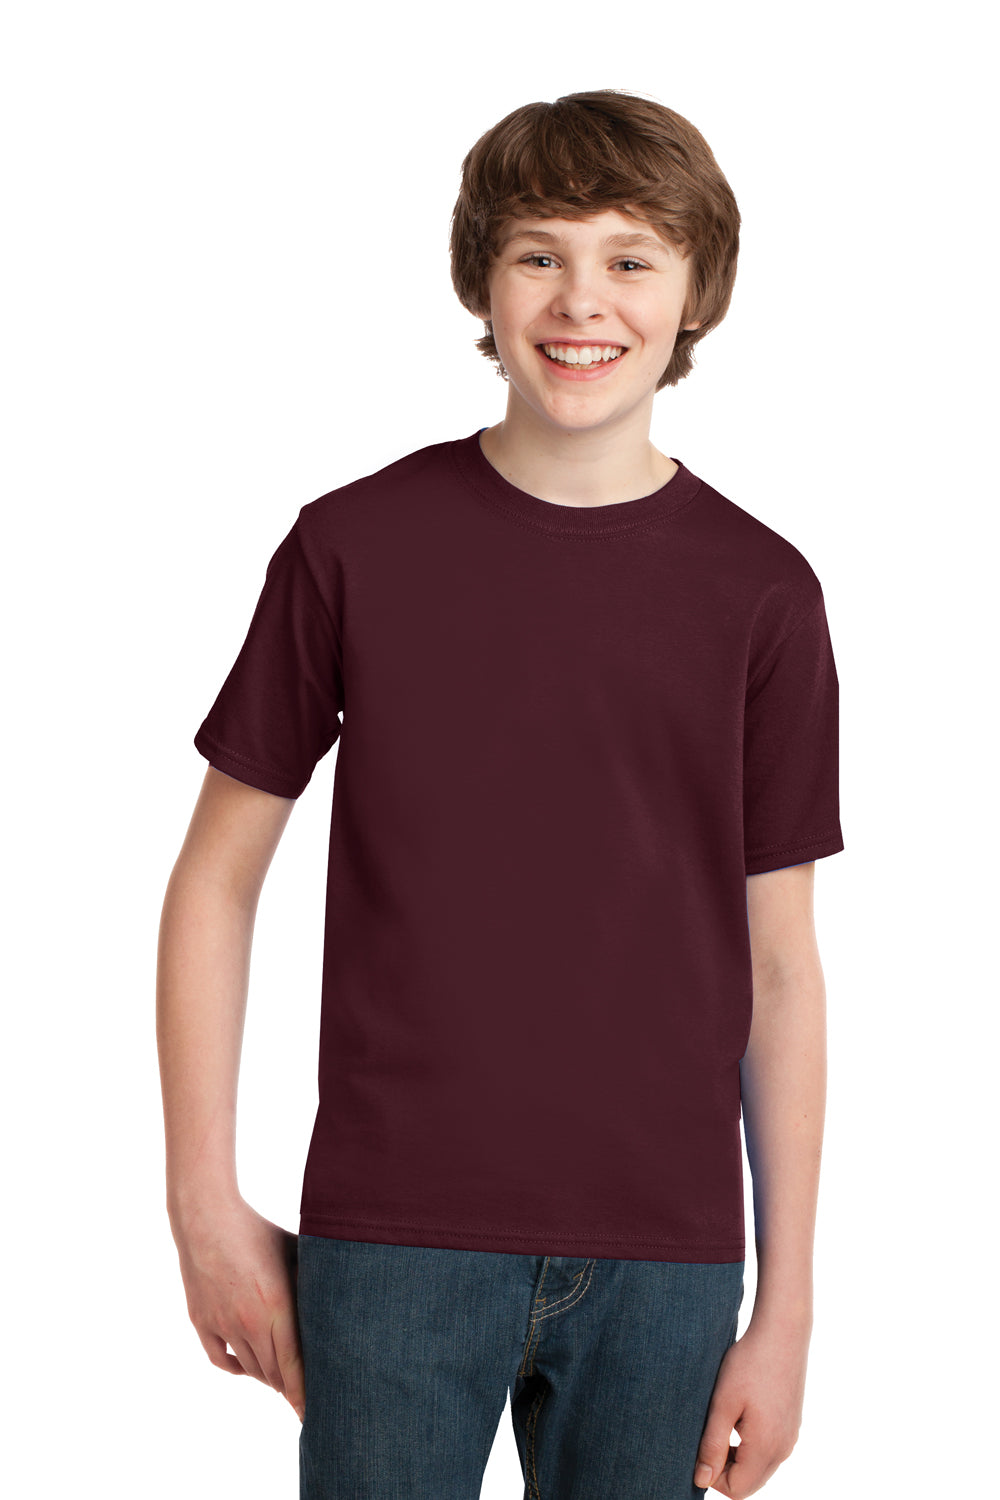 Port & Company PC61Y Youth Essential Short Sleeve Crewneck T-Shirt Maroon Front